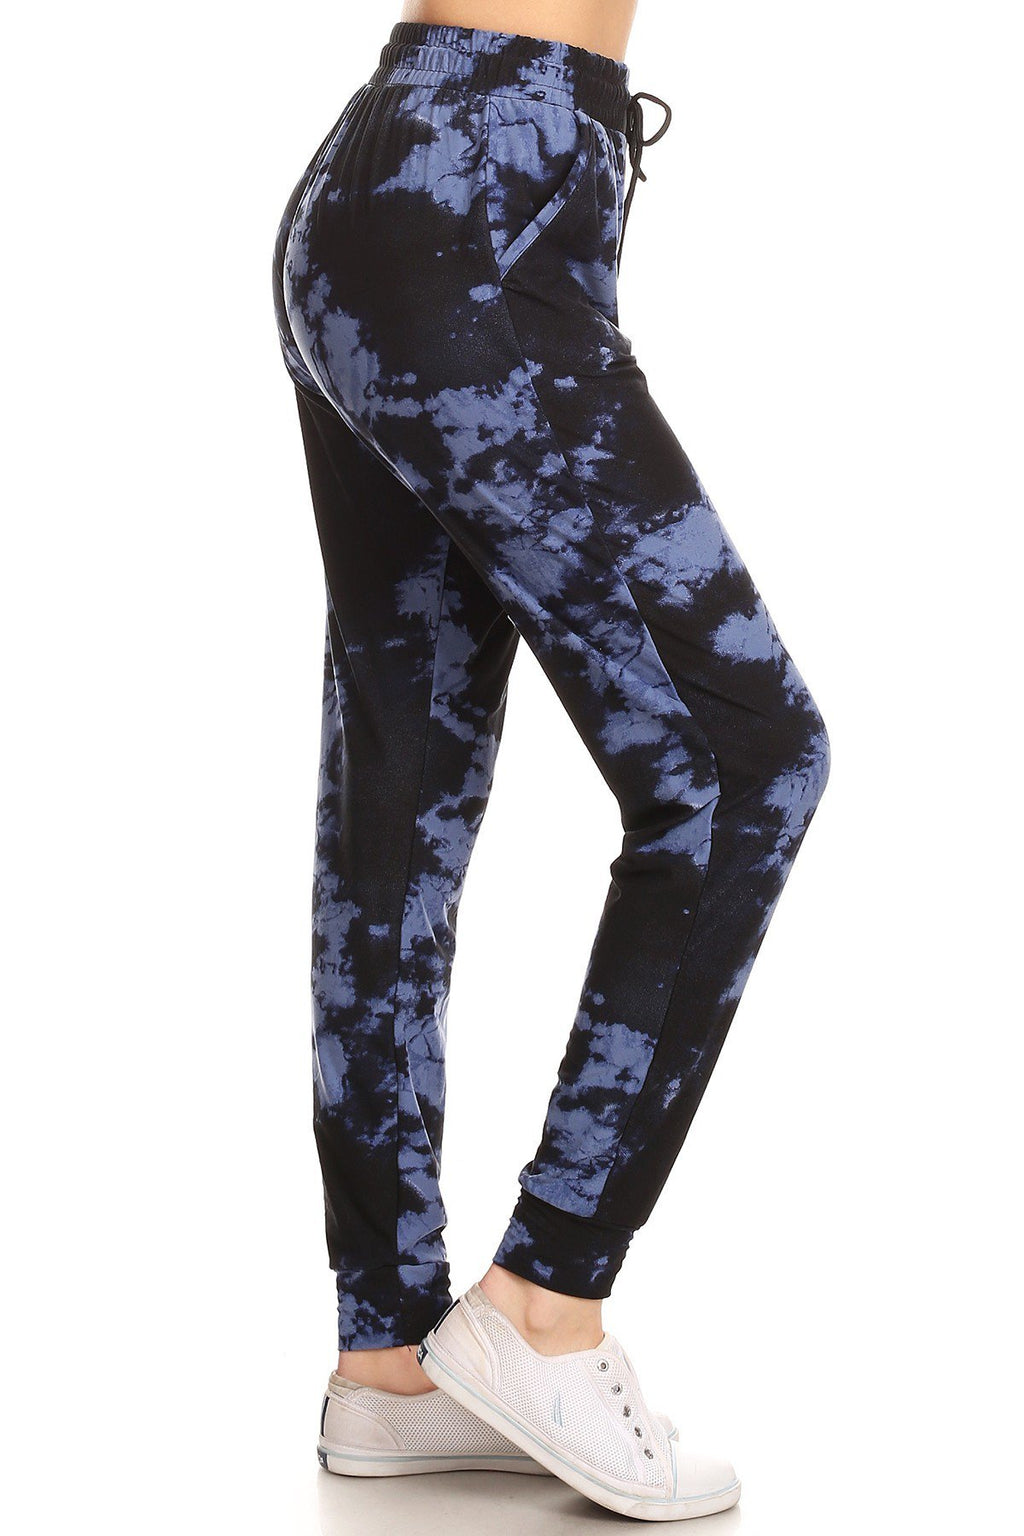 DK BLUE TIE DYE joggers with solid trim, drawstring waistband, waist pockets, and cuffed hems